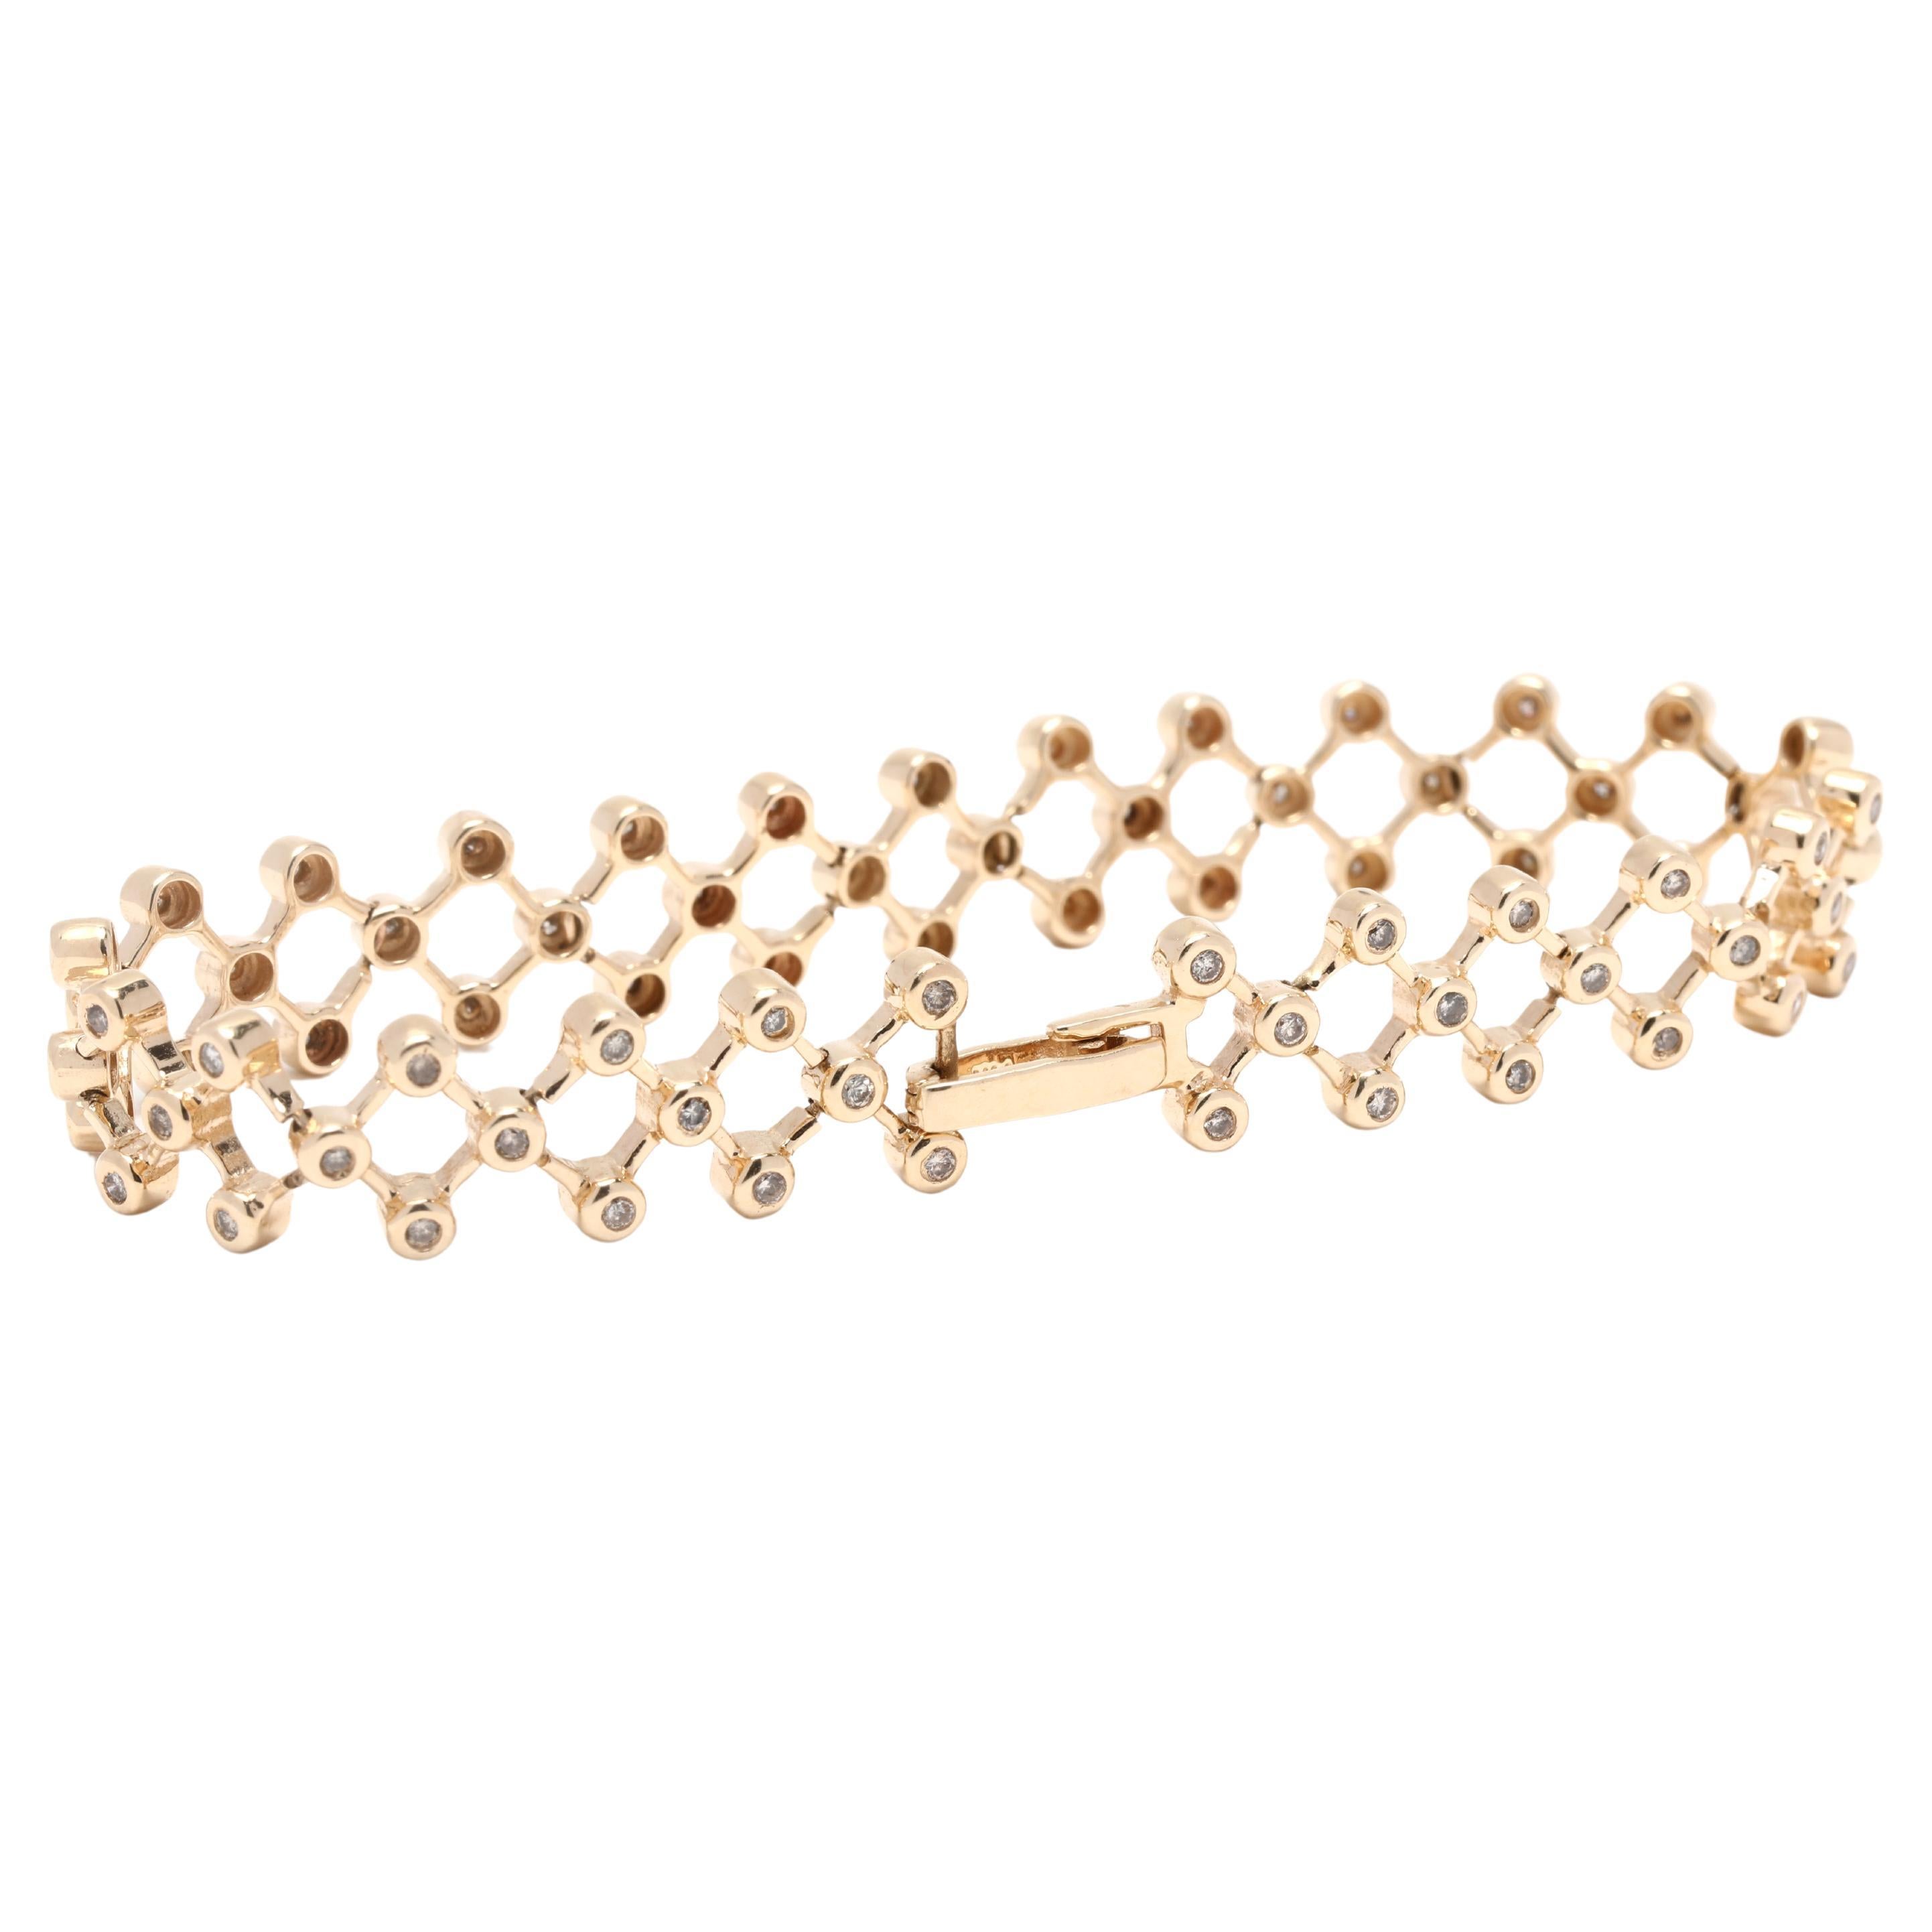 This dazzling diamond lattice bracelet is an eye-catching piece of jewelry. Crafted from 14K yellow gold, it features a total of 1ctw of fancy diamonds arranged in a lattice pattern across the entire bracelet. The 7.25 inch length makes it a perfect